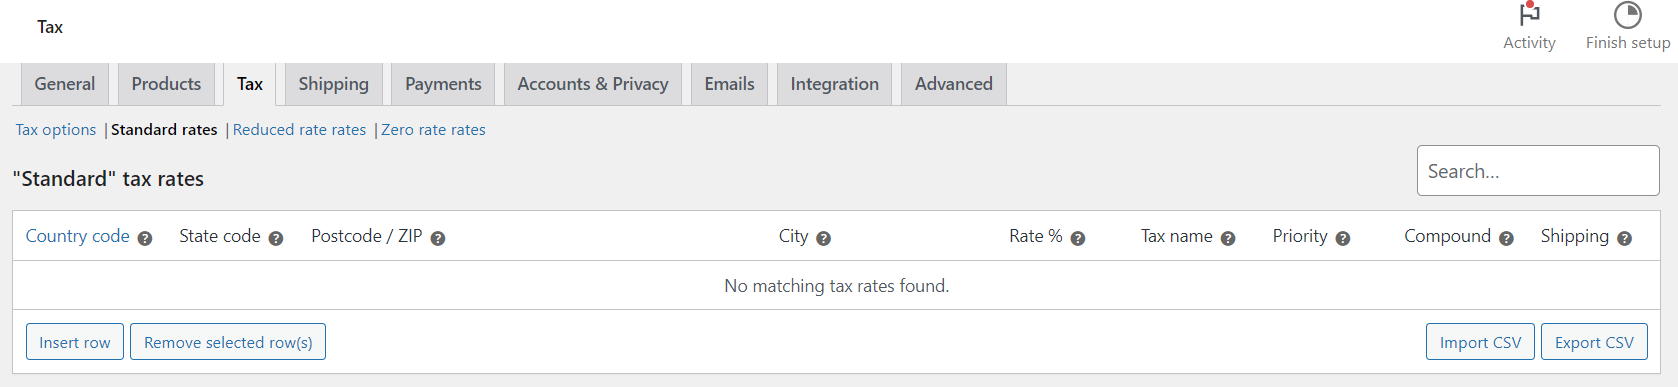 How to set up WooCommerce tax settings